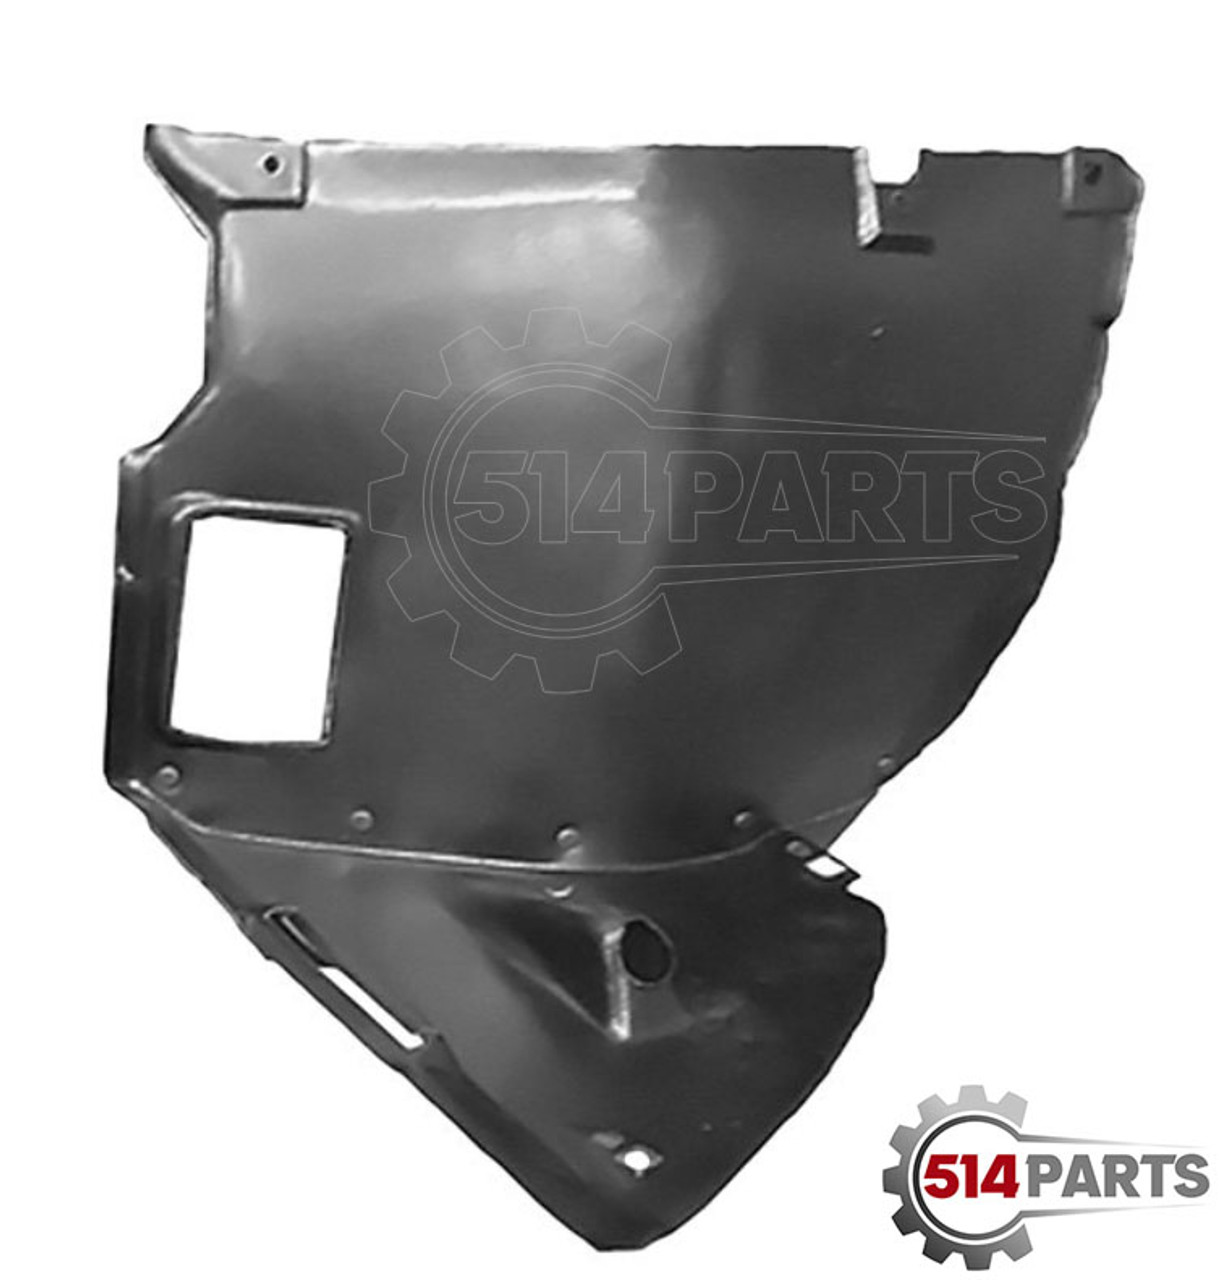 BMW 3 SERIES (1999 - 2006 SEDAN), (2000 - 2006 WAGON) FENDER LINER FRONT SECTION - FAUSSE AILE